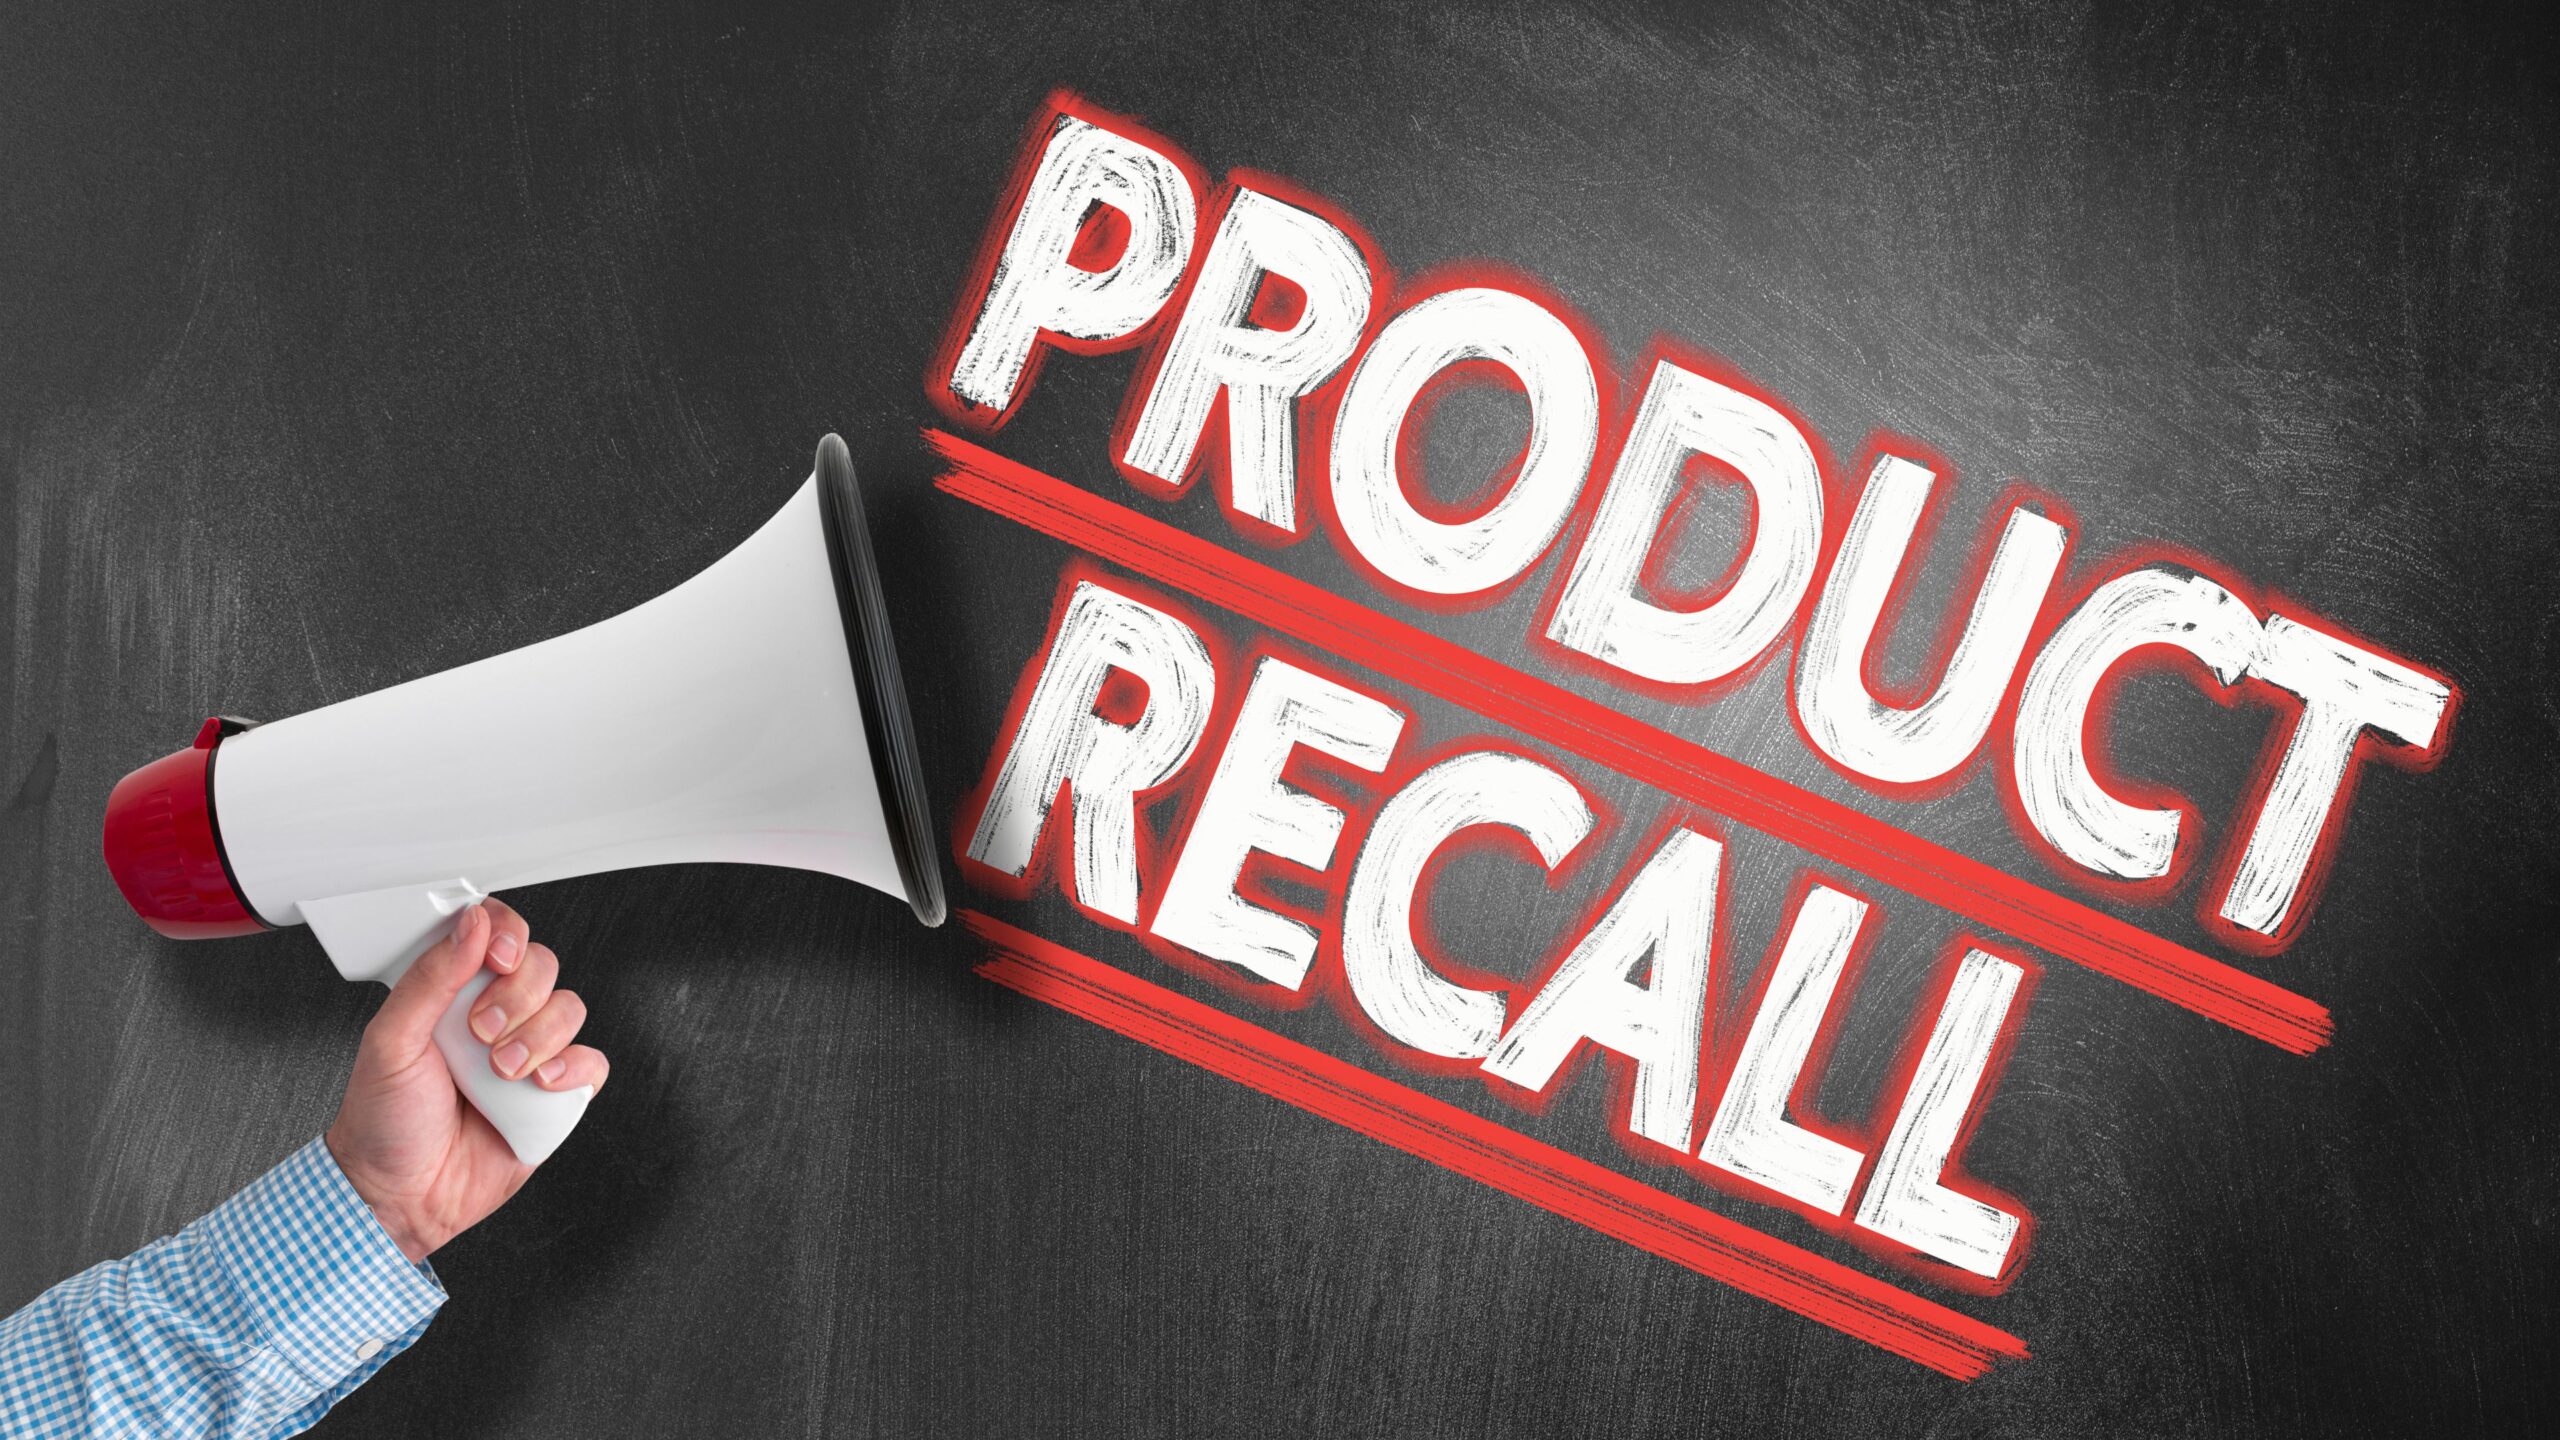 Another Product Recall. Could Your Business Cope?